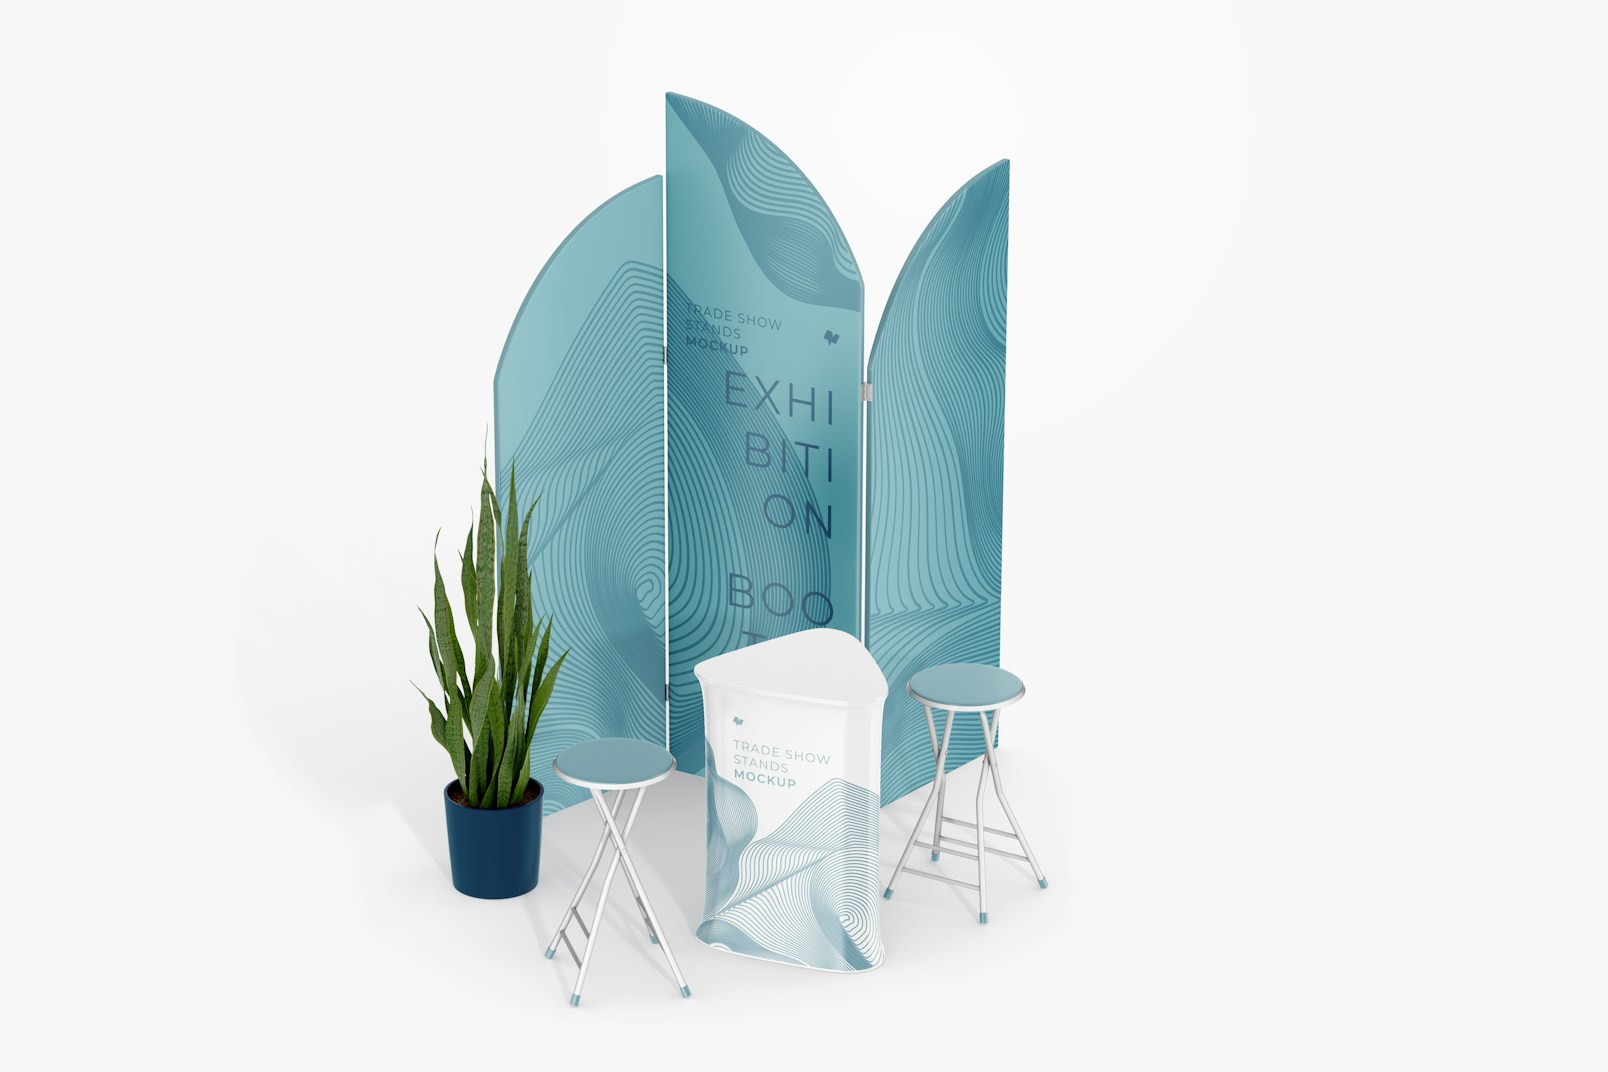 Exhibition Booth Mockup, with Plant